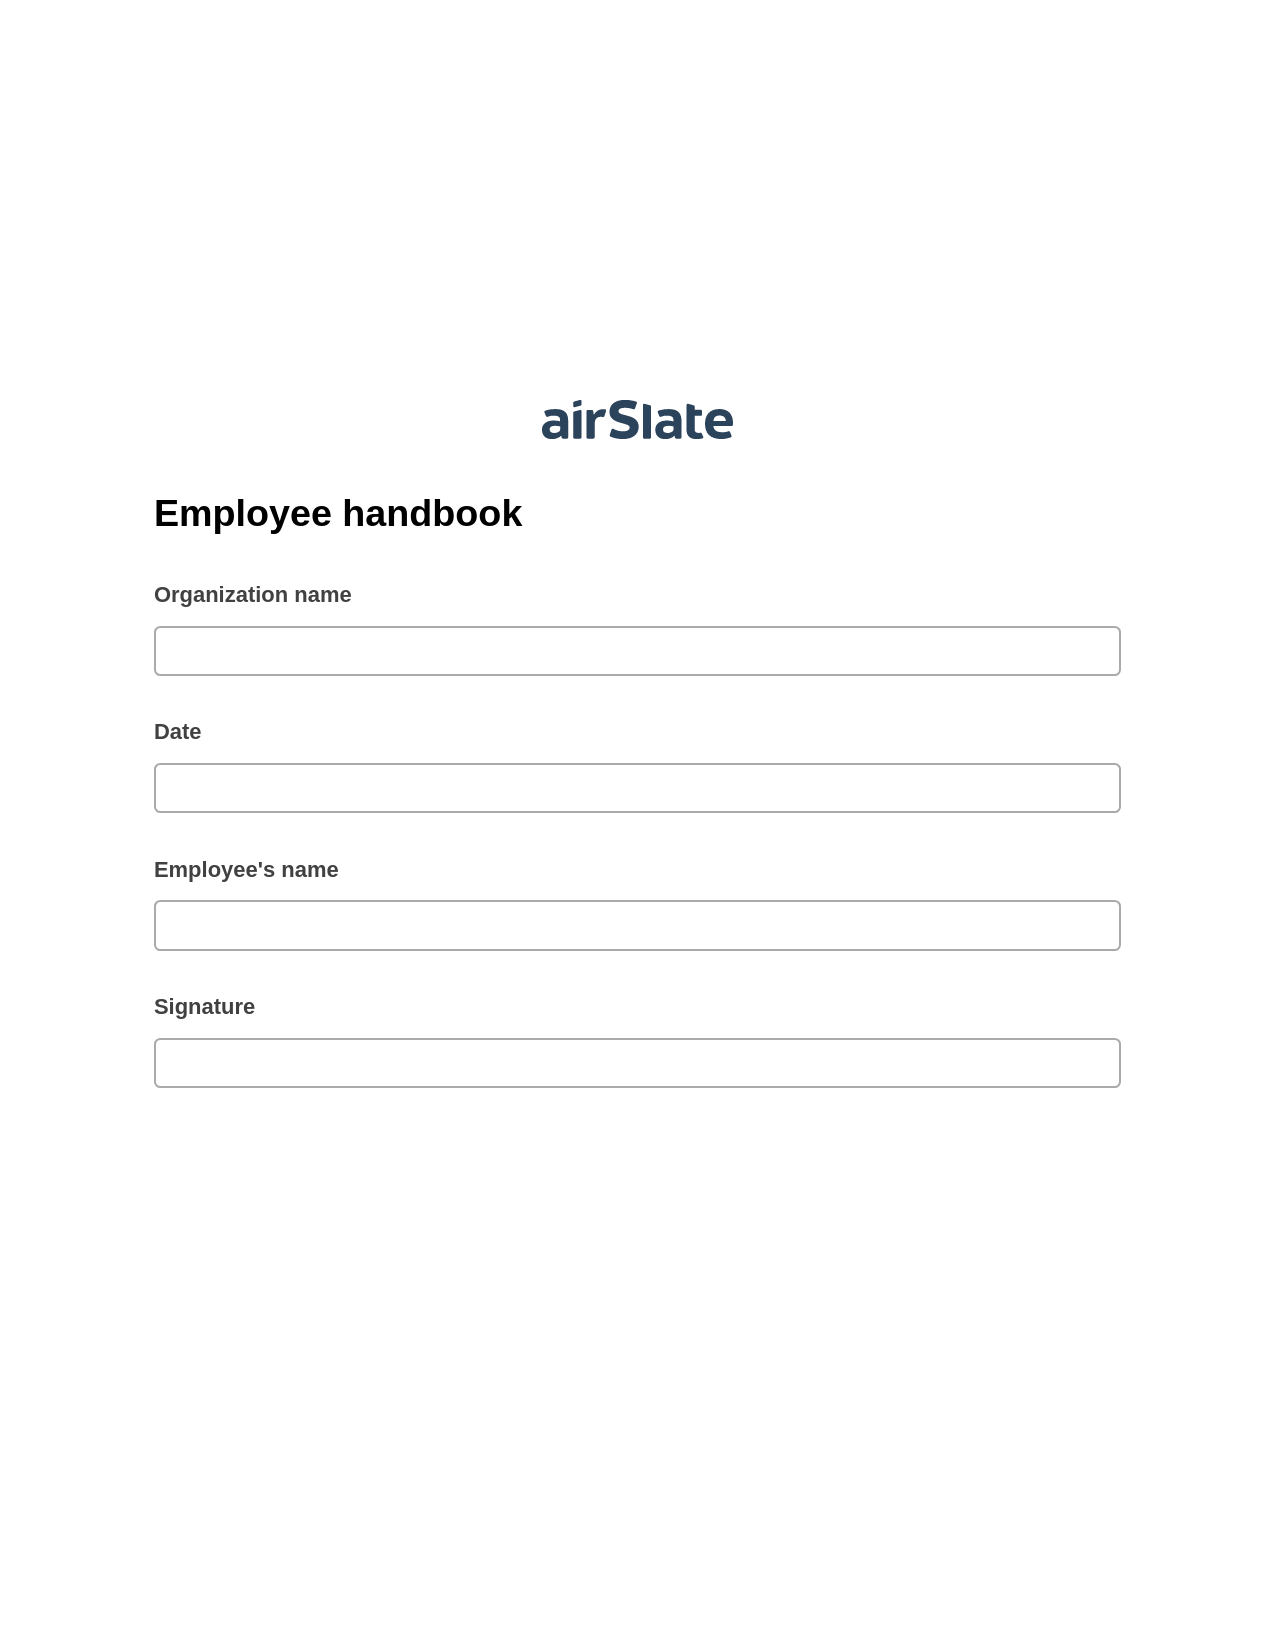 Employee handbook Pre-fill from Salesforce Records with SOQL Bot, Update Salesforce Record Bot, Export to Formstack Documents Bot